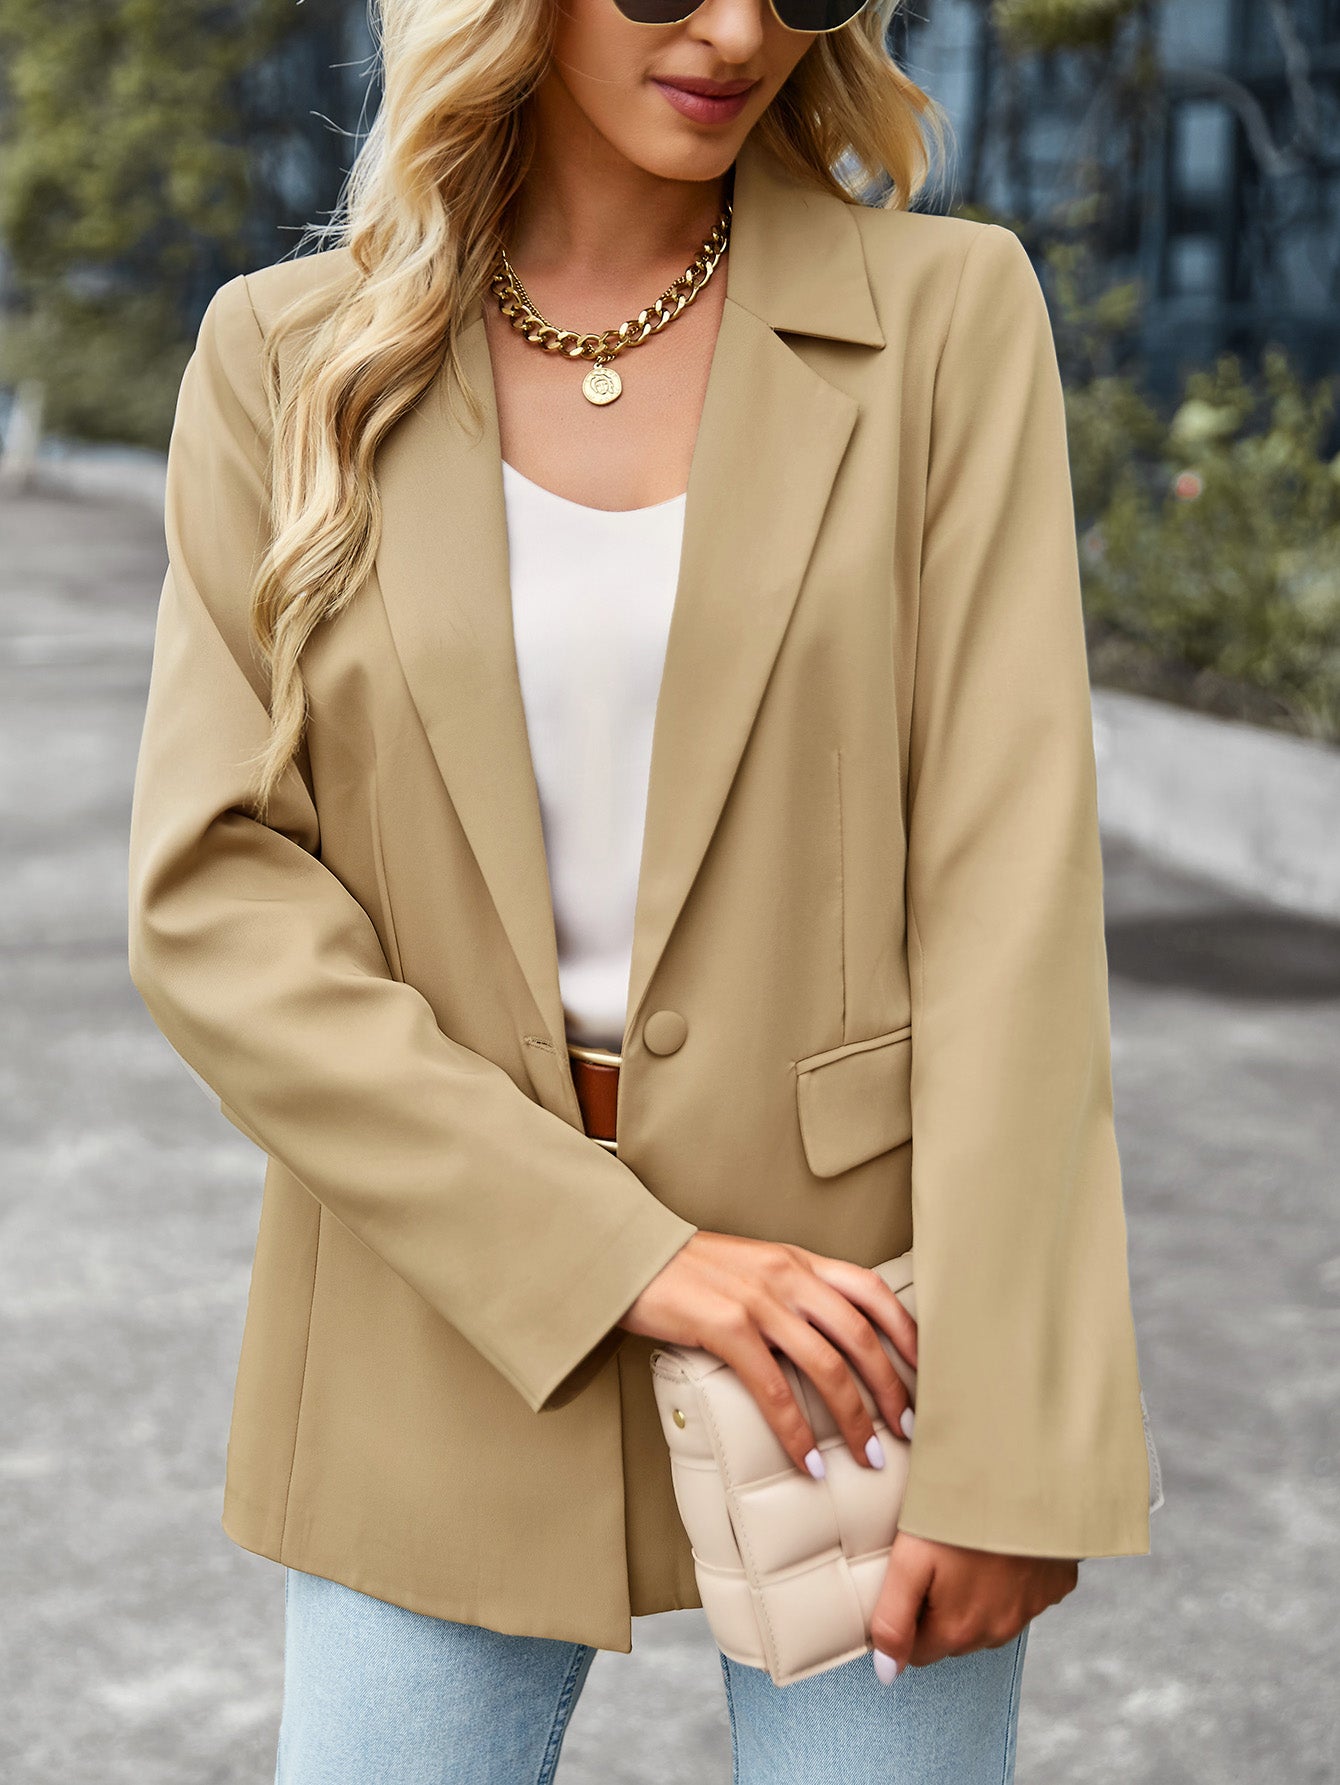 YESFASHION Self-developed And Designed American Station Casual Small Suit 2022 Winter All-match Jacket Professional Formal Women